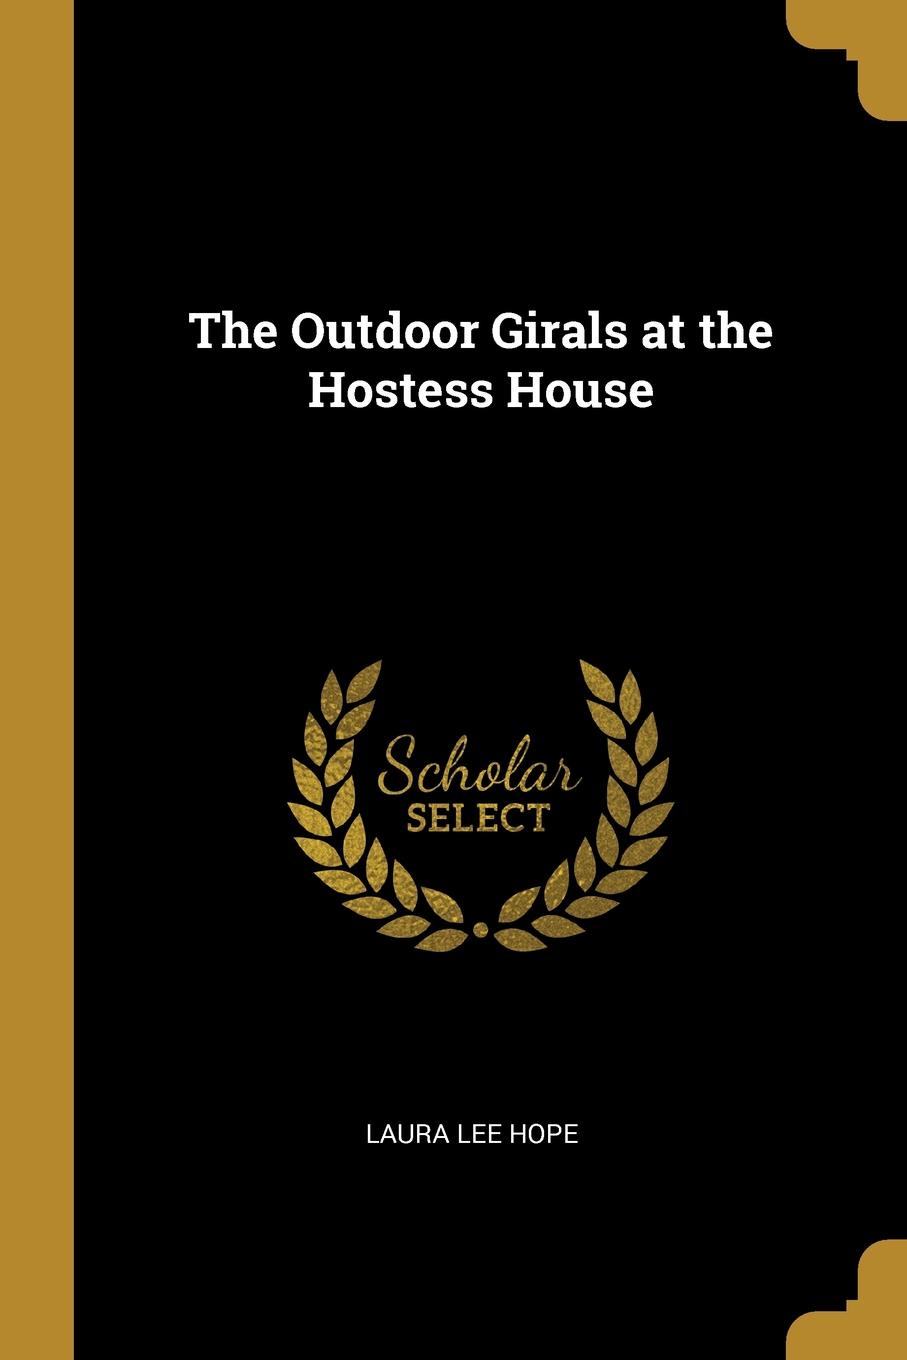 The Outdoor Girals at the Hostess House